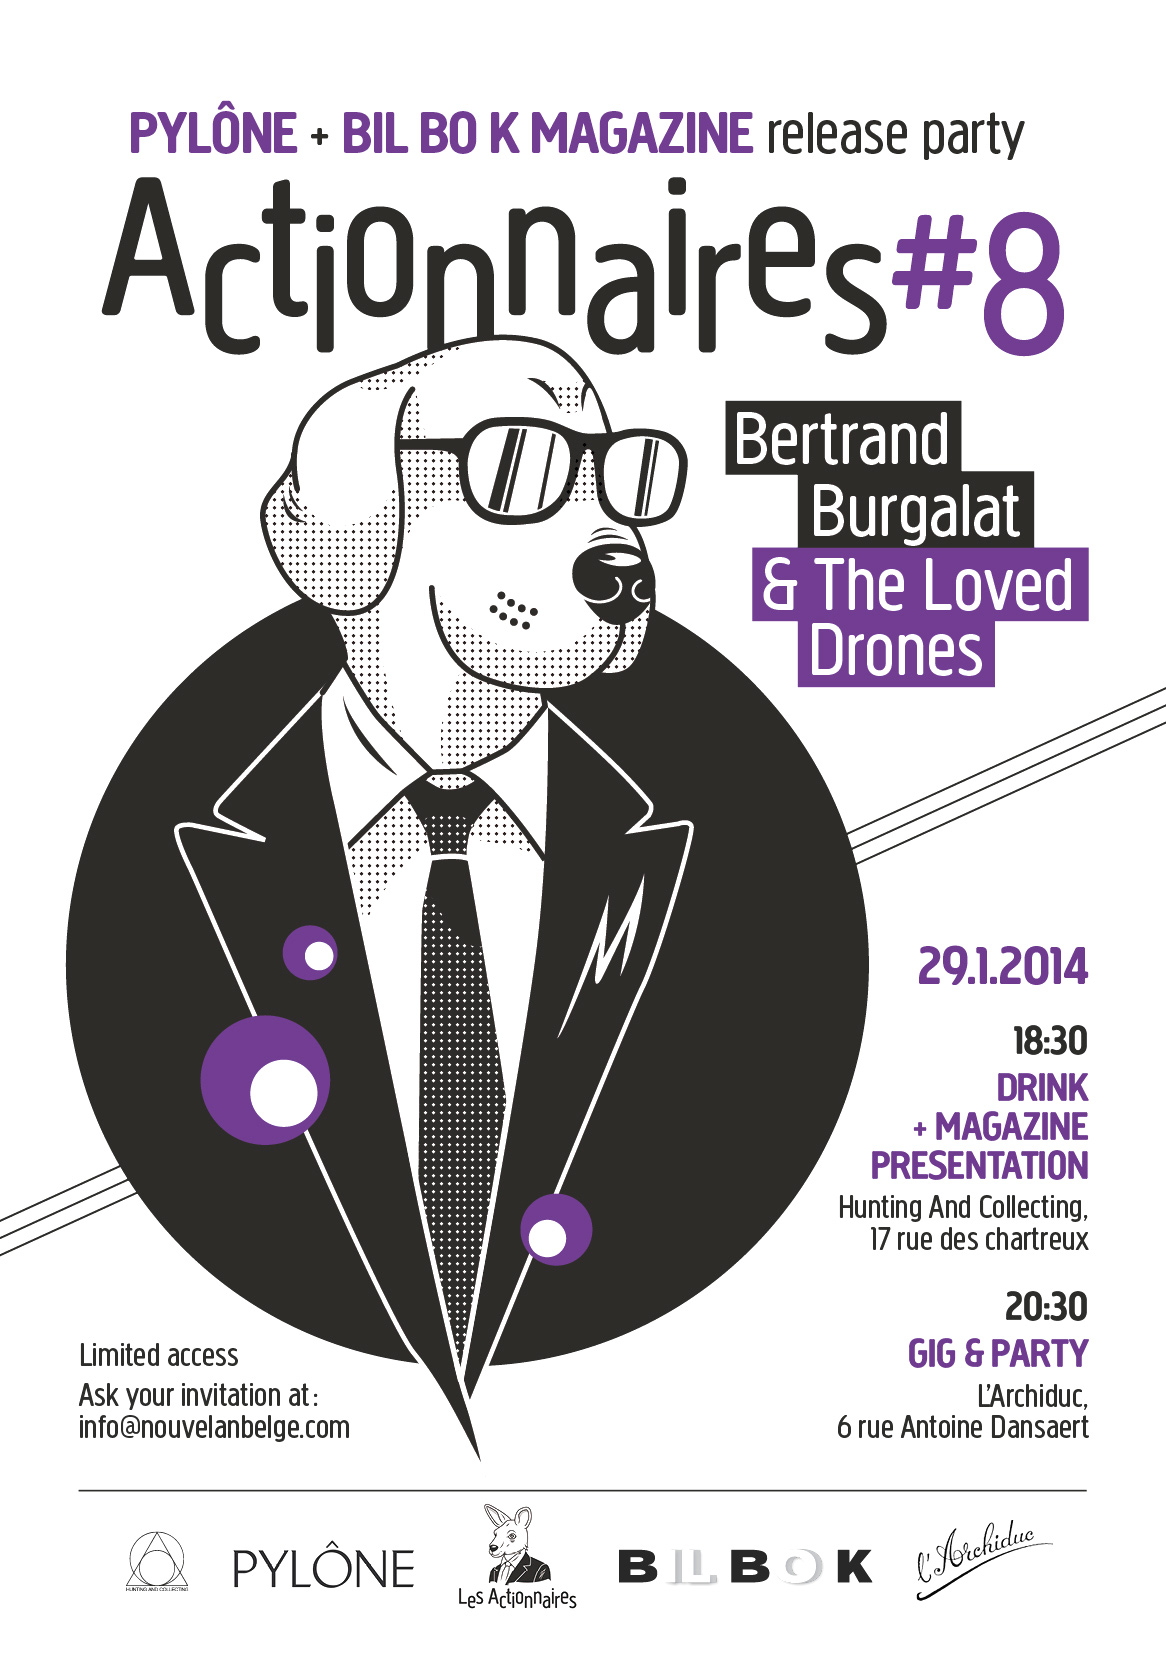 Actionnaires #8 Bertrand burgalat + The loved Drones